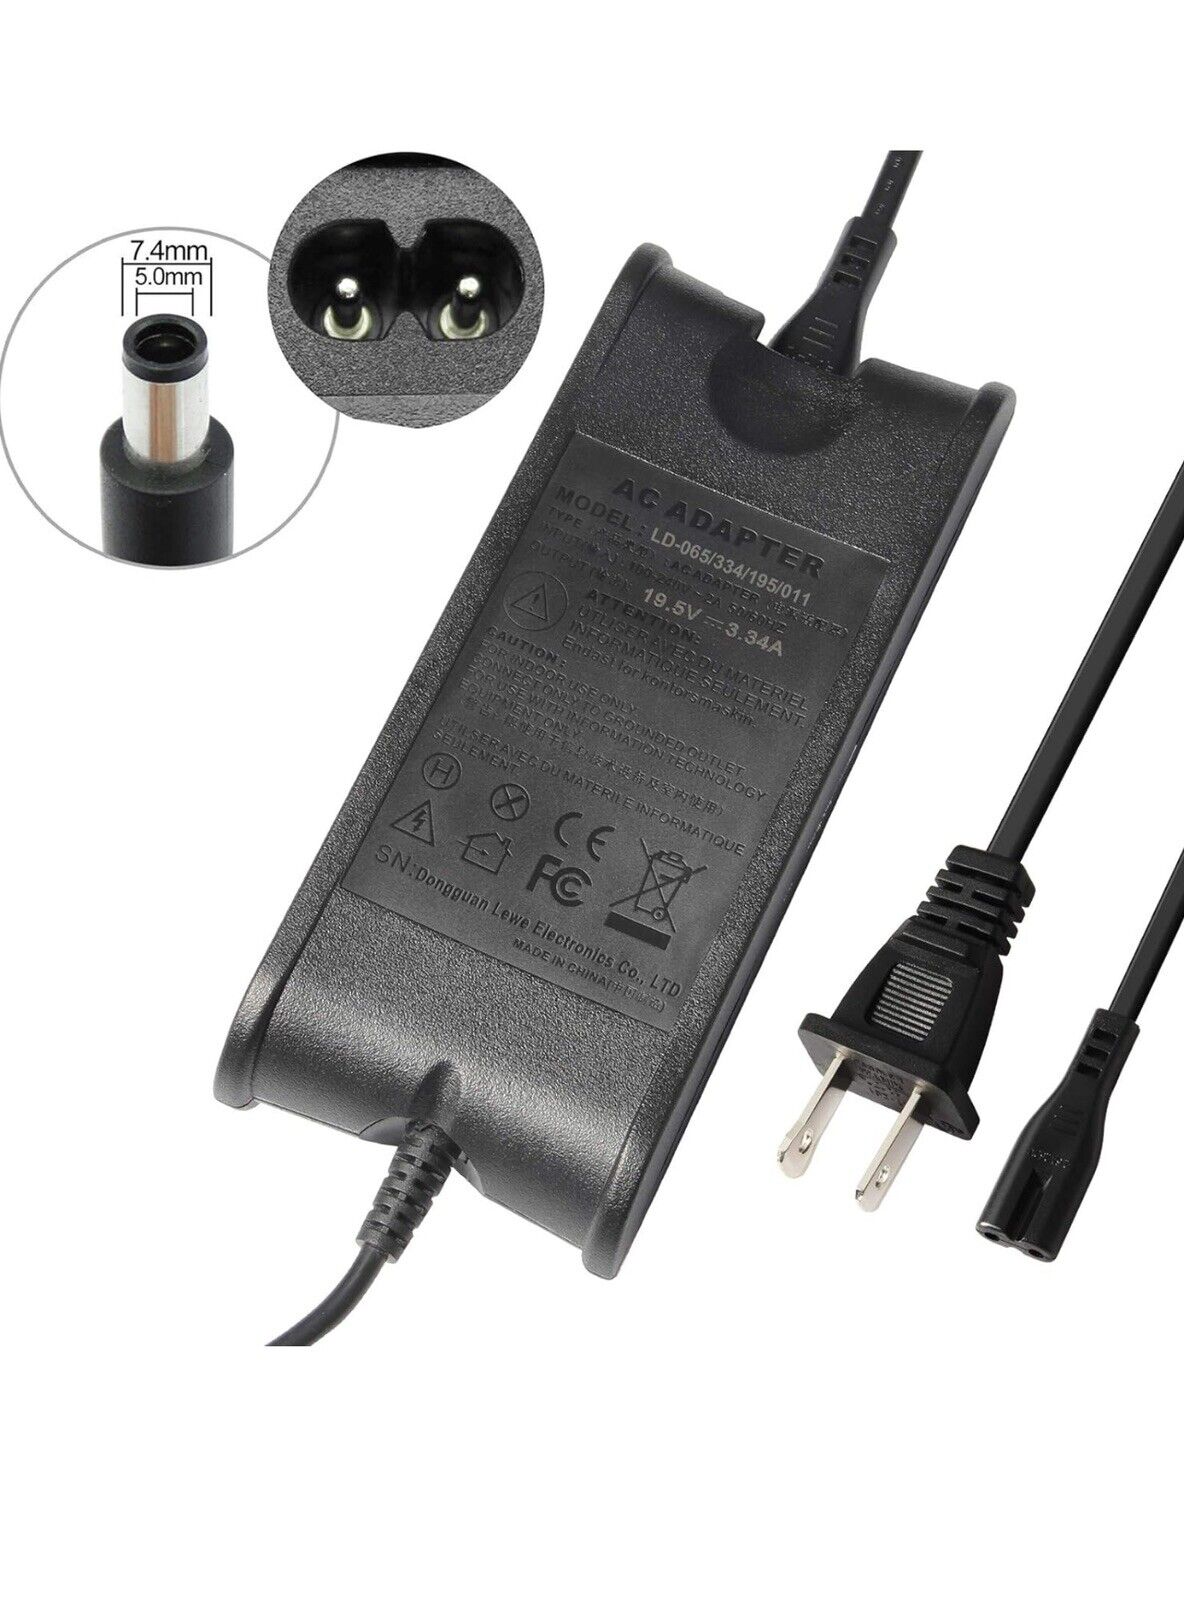 REPLACEMENT AC ADAPTER FOR DELL 19.5V 3.34A LD-065/334/195/011   (FREE SHIPPING)